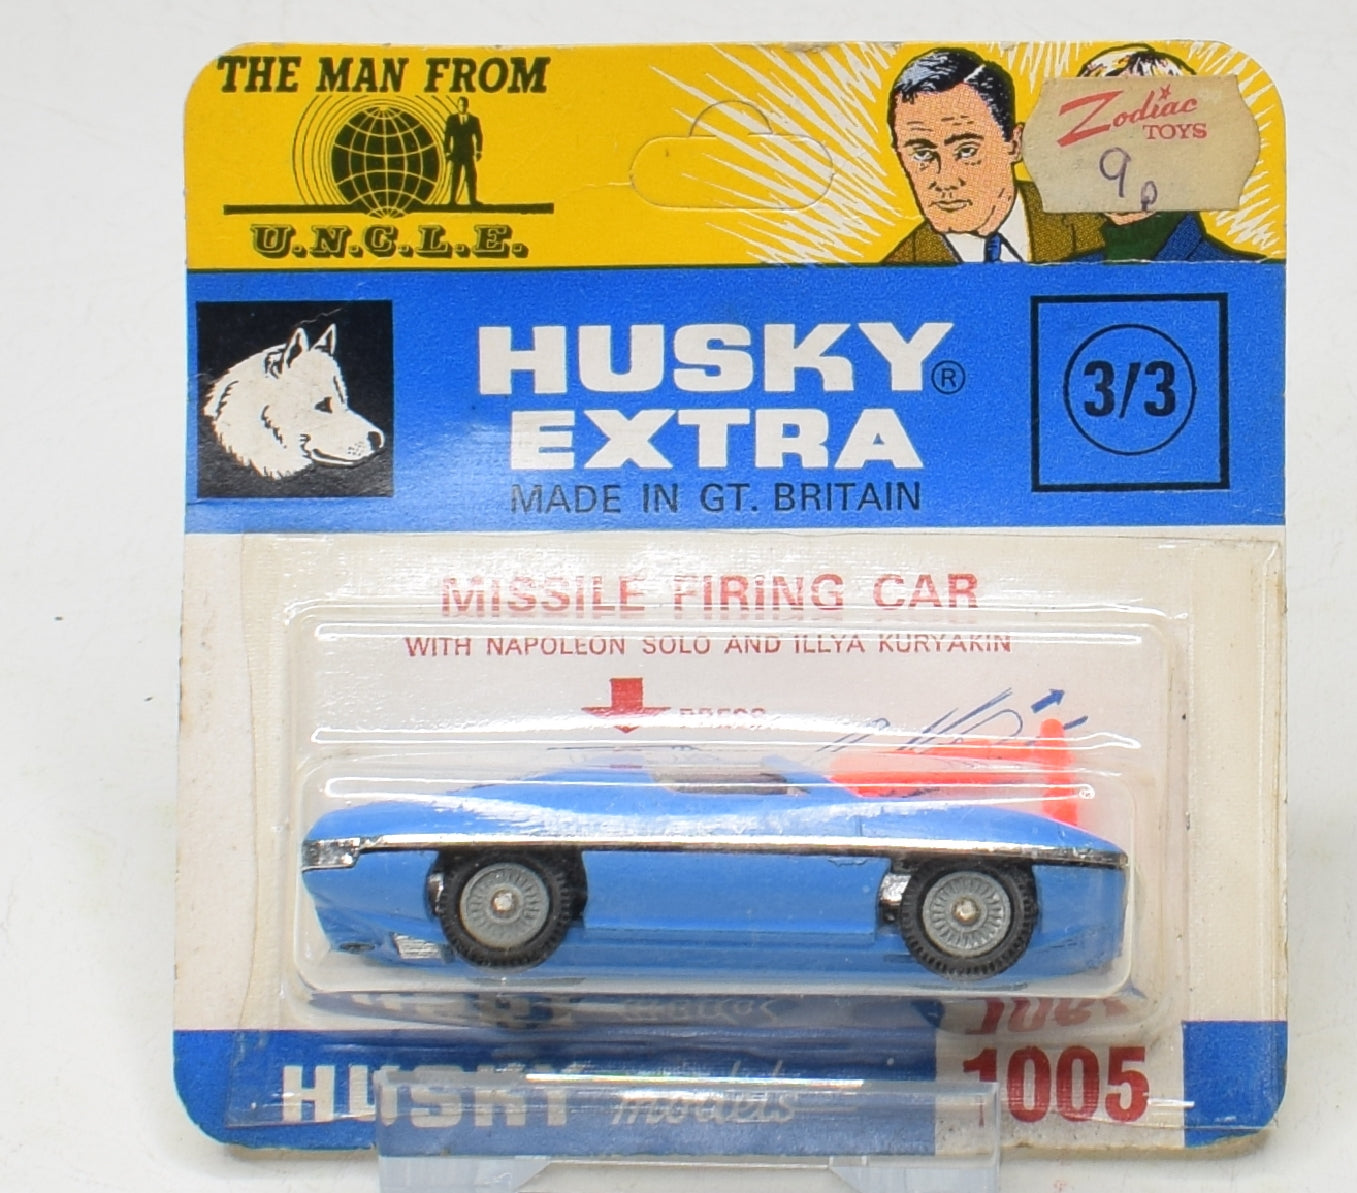 Husky models 1005 Man from Uncle Virtually Mint/Boxed 'Finley' Collection